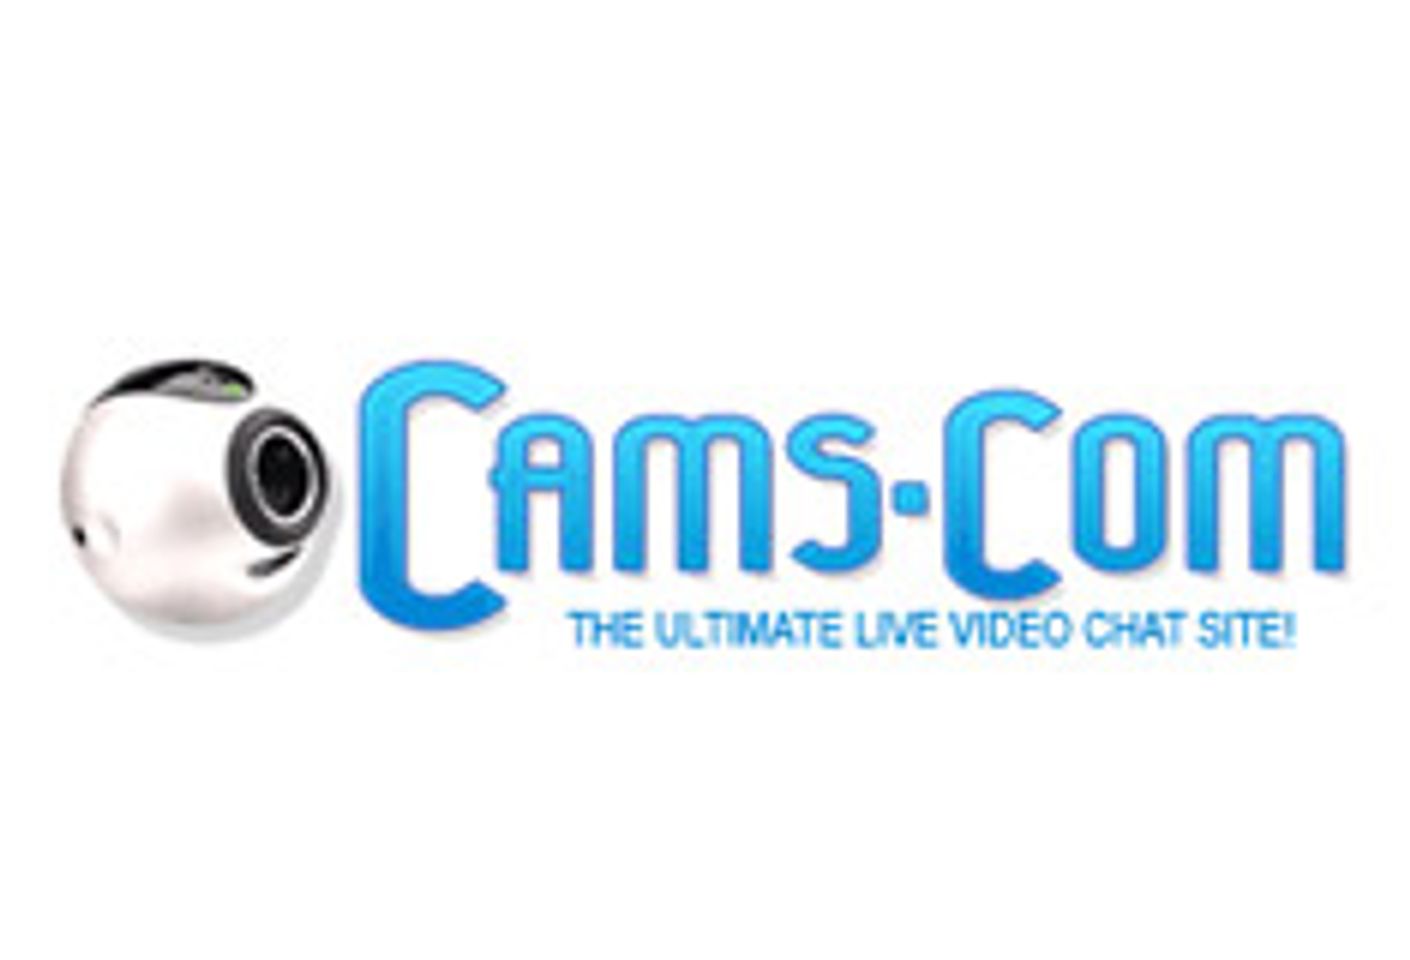 Streamray Launches All New Cams.com